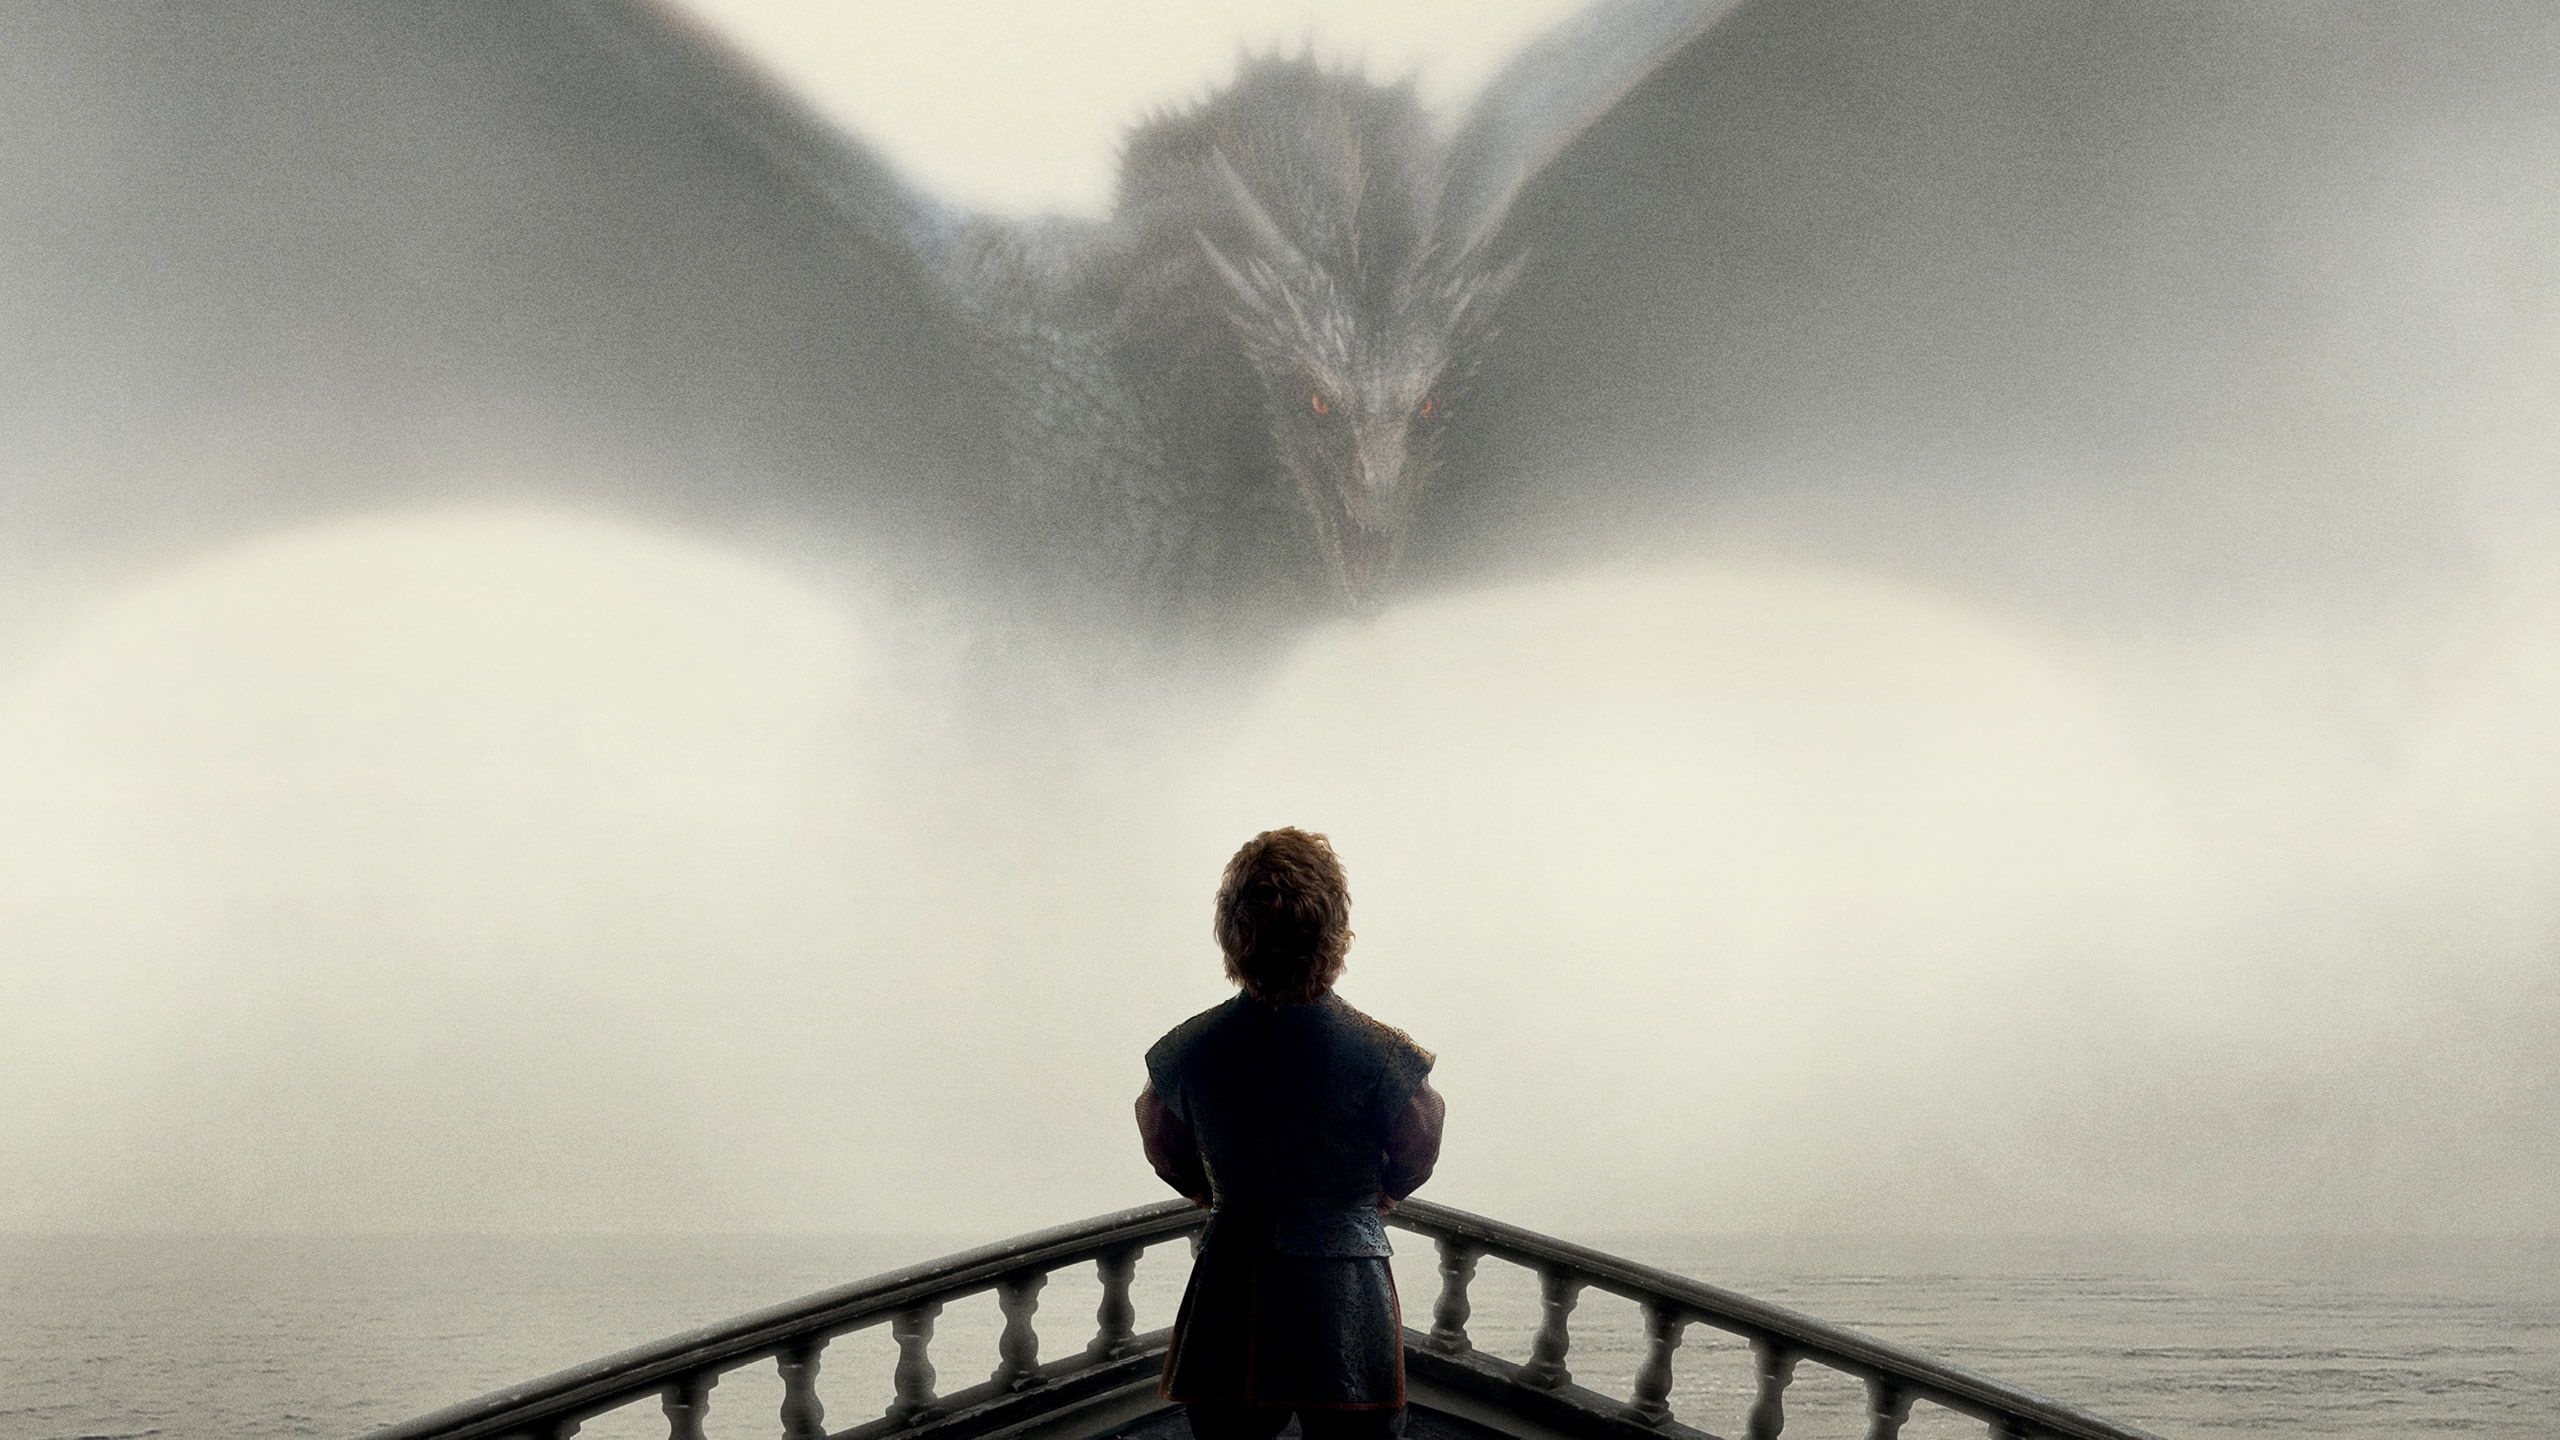 Game of Thrones, Tyrion and Drogon, Game of Thrones systems, Dreharbeiten, 2560x1440 HD Desktop